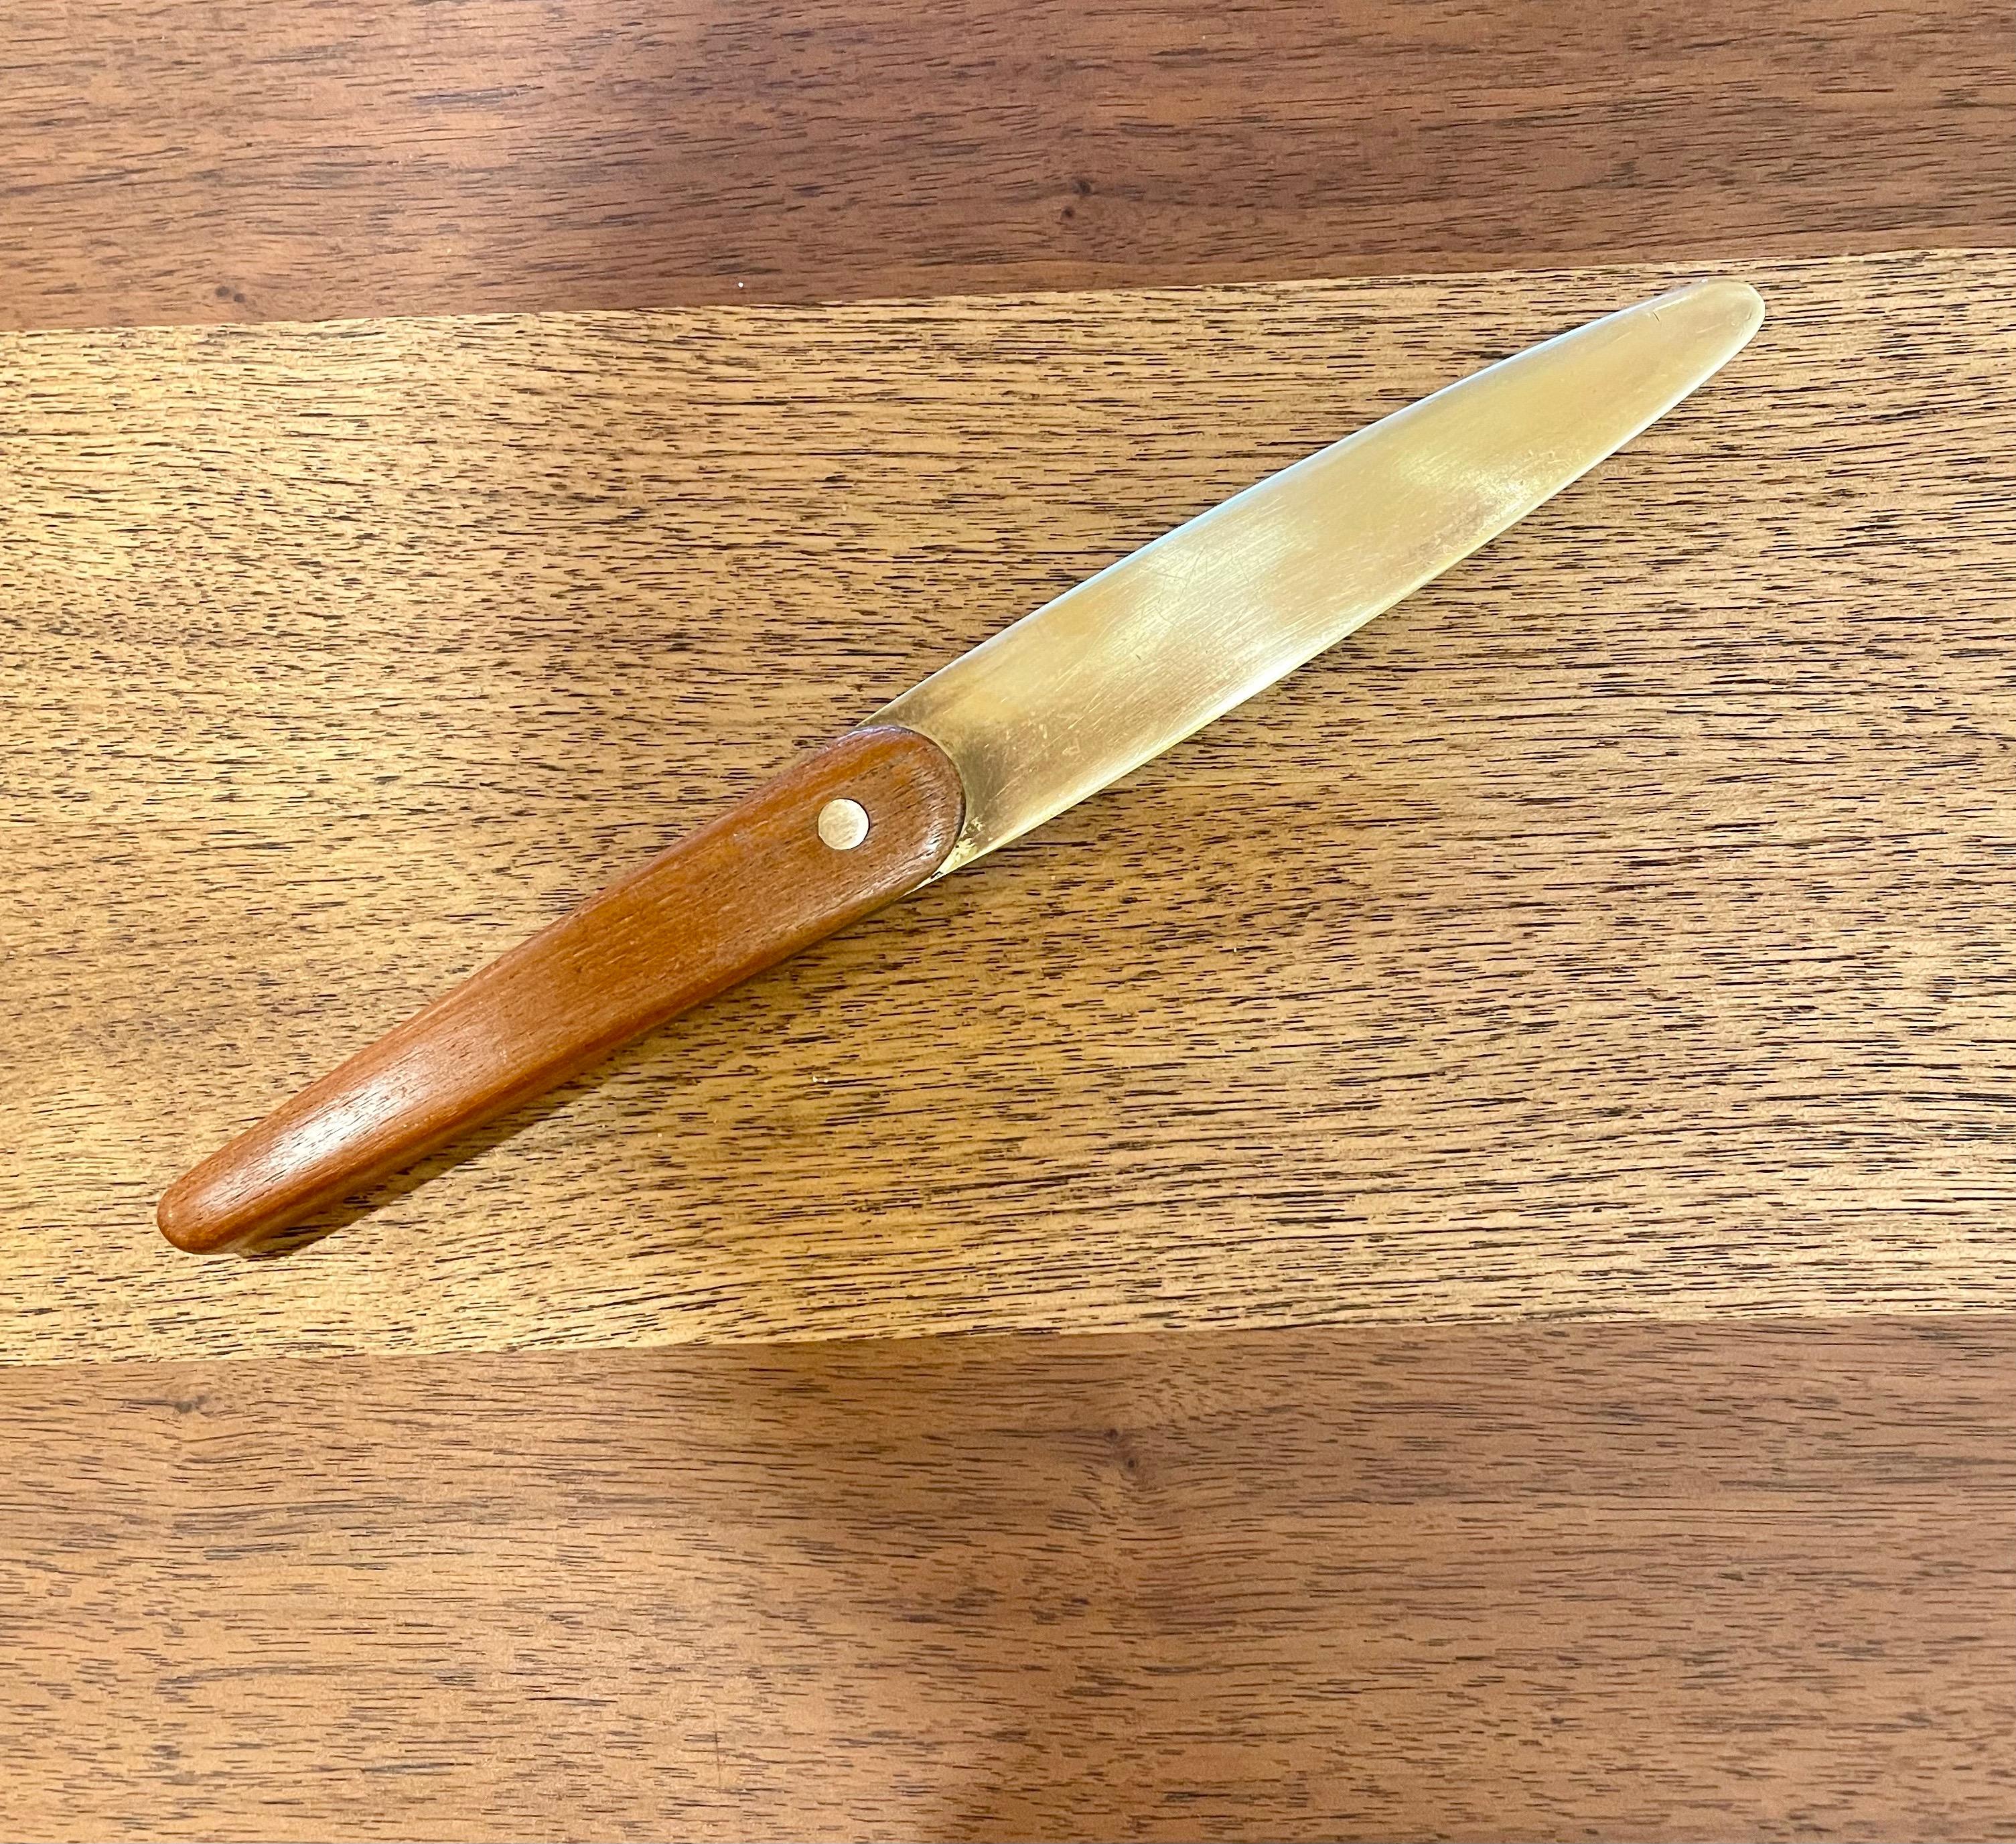 Letter opener in teak and brass, designed by Jens Quistgaard, and produced by Dansk. Measures: 10 1/4” long and 1